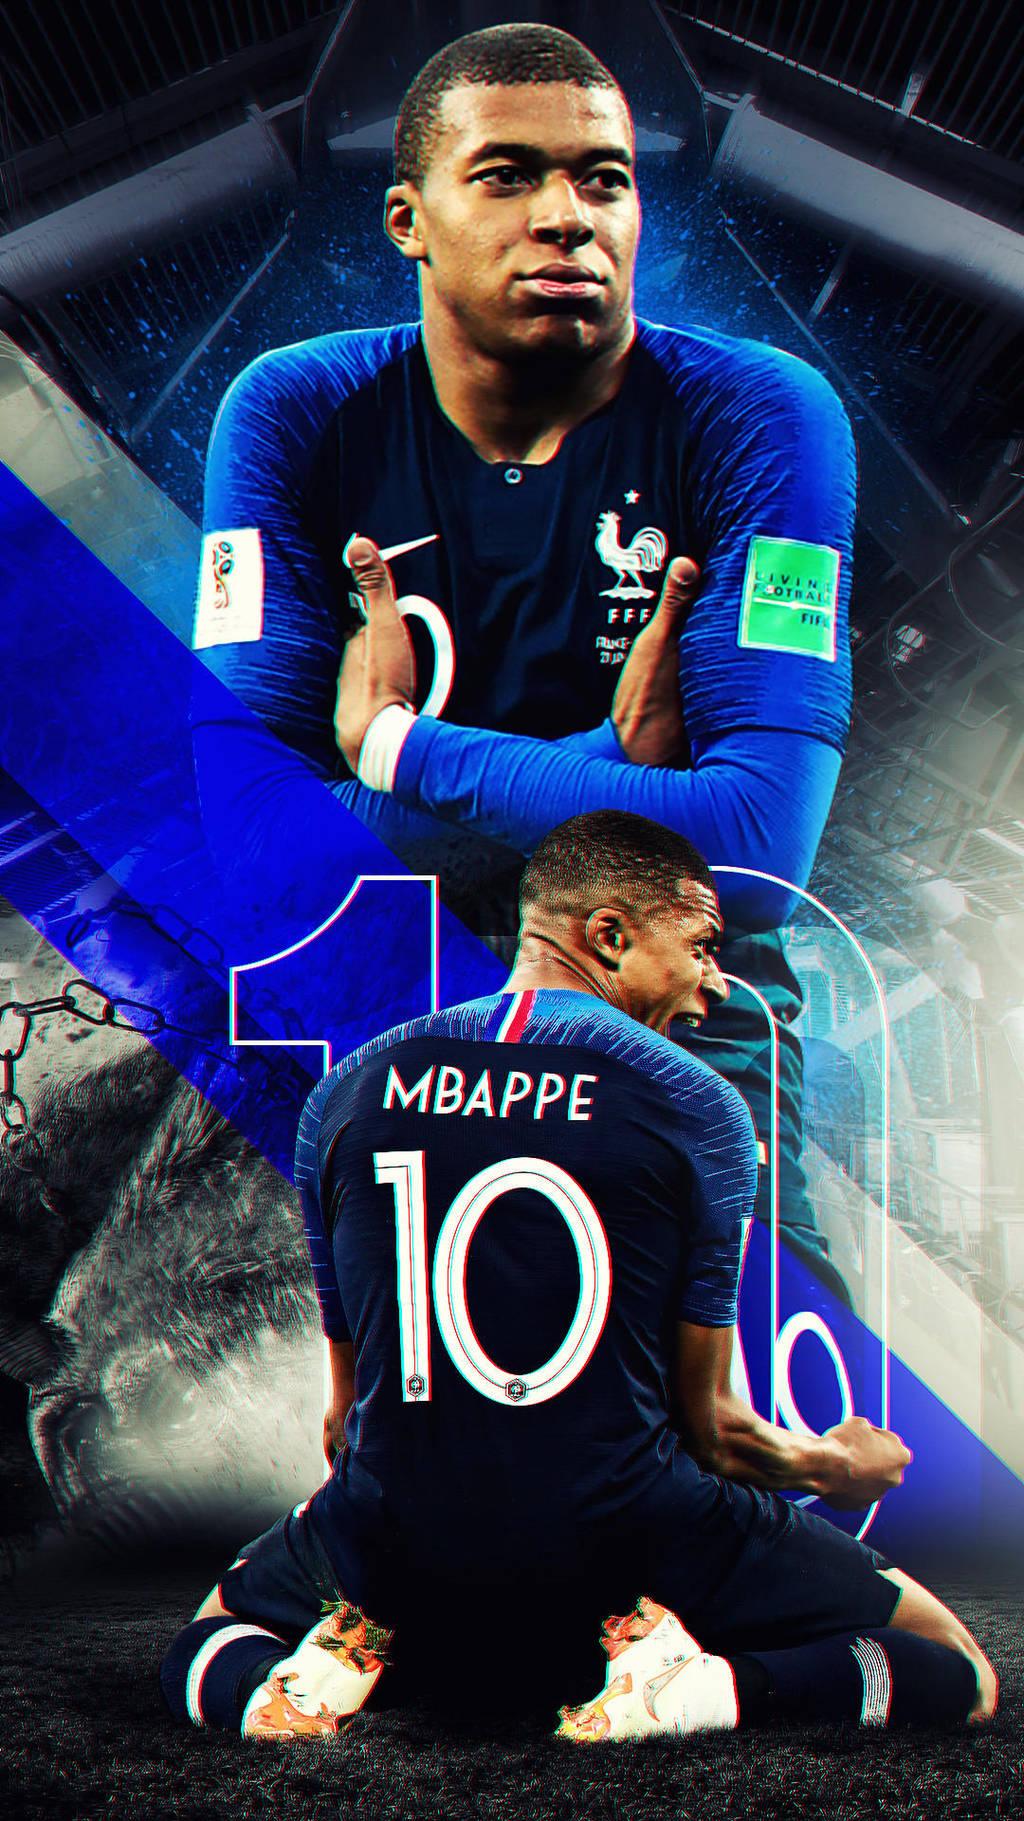 Kylian Mbappe Wallpaper Download High Quality HD Image of Mbappe